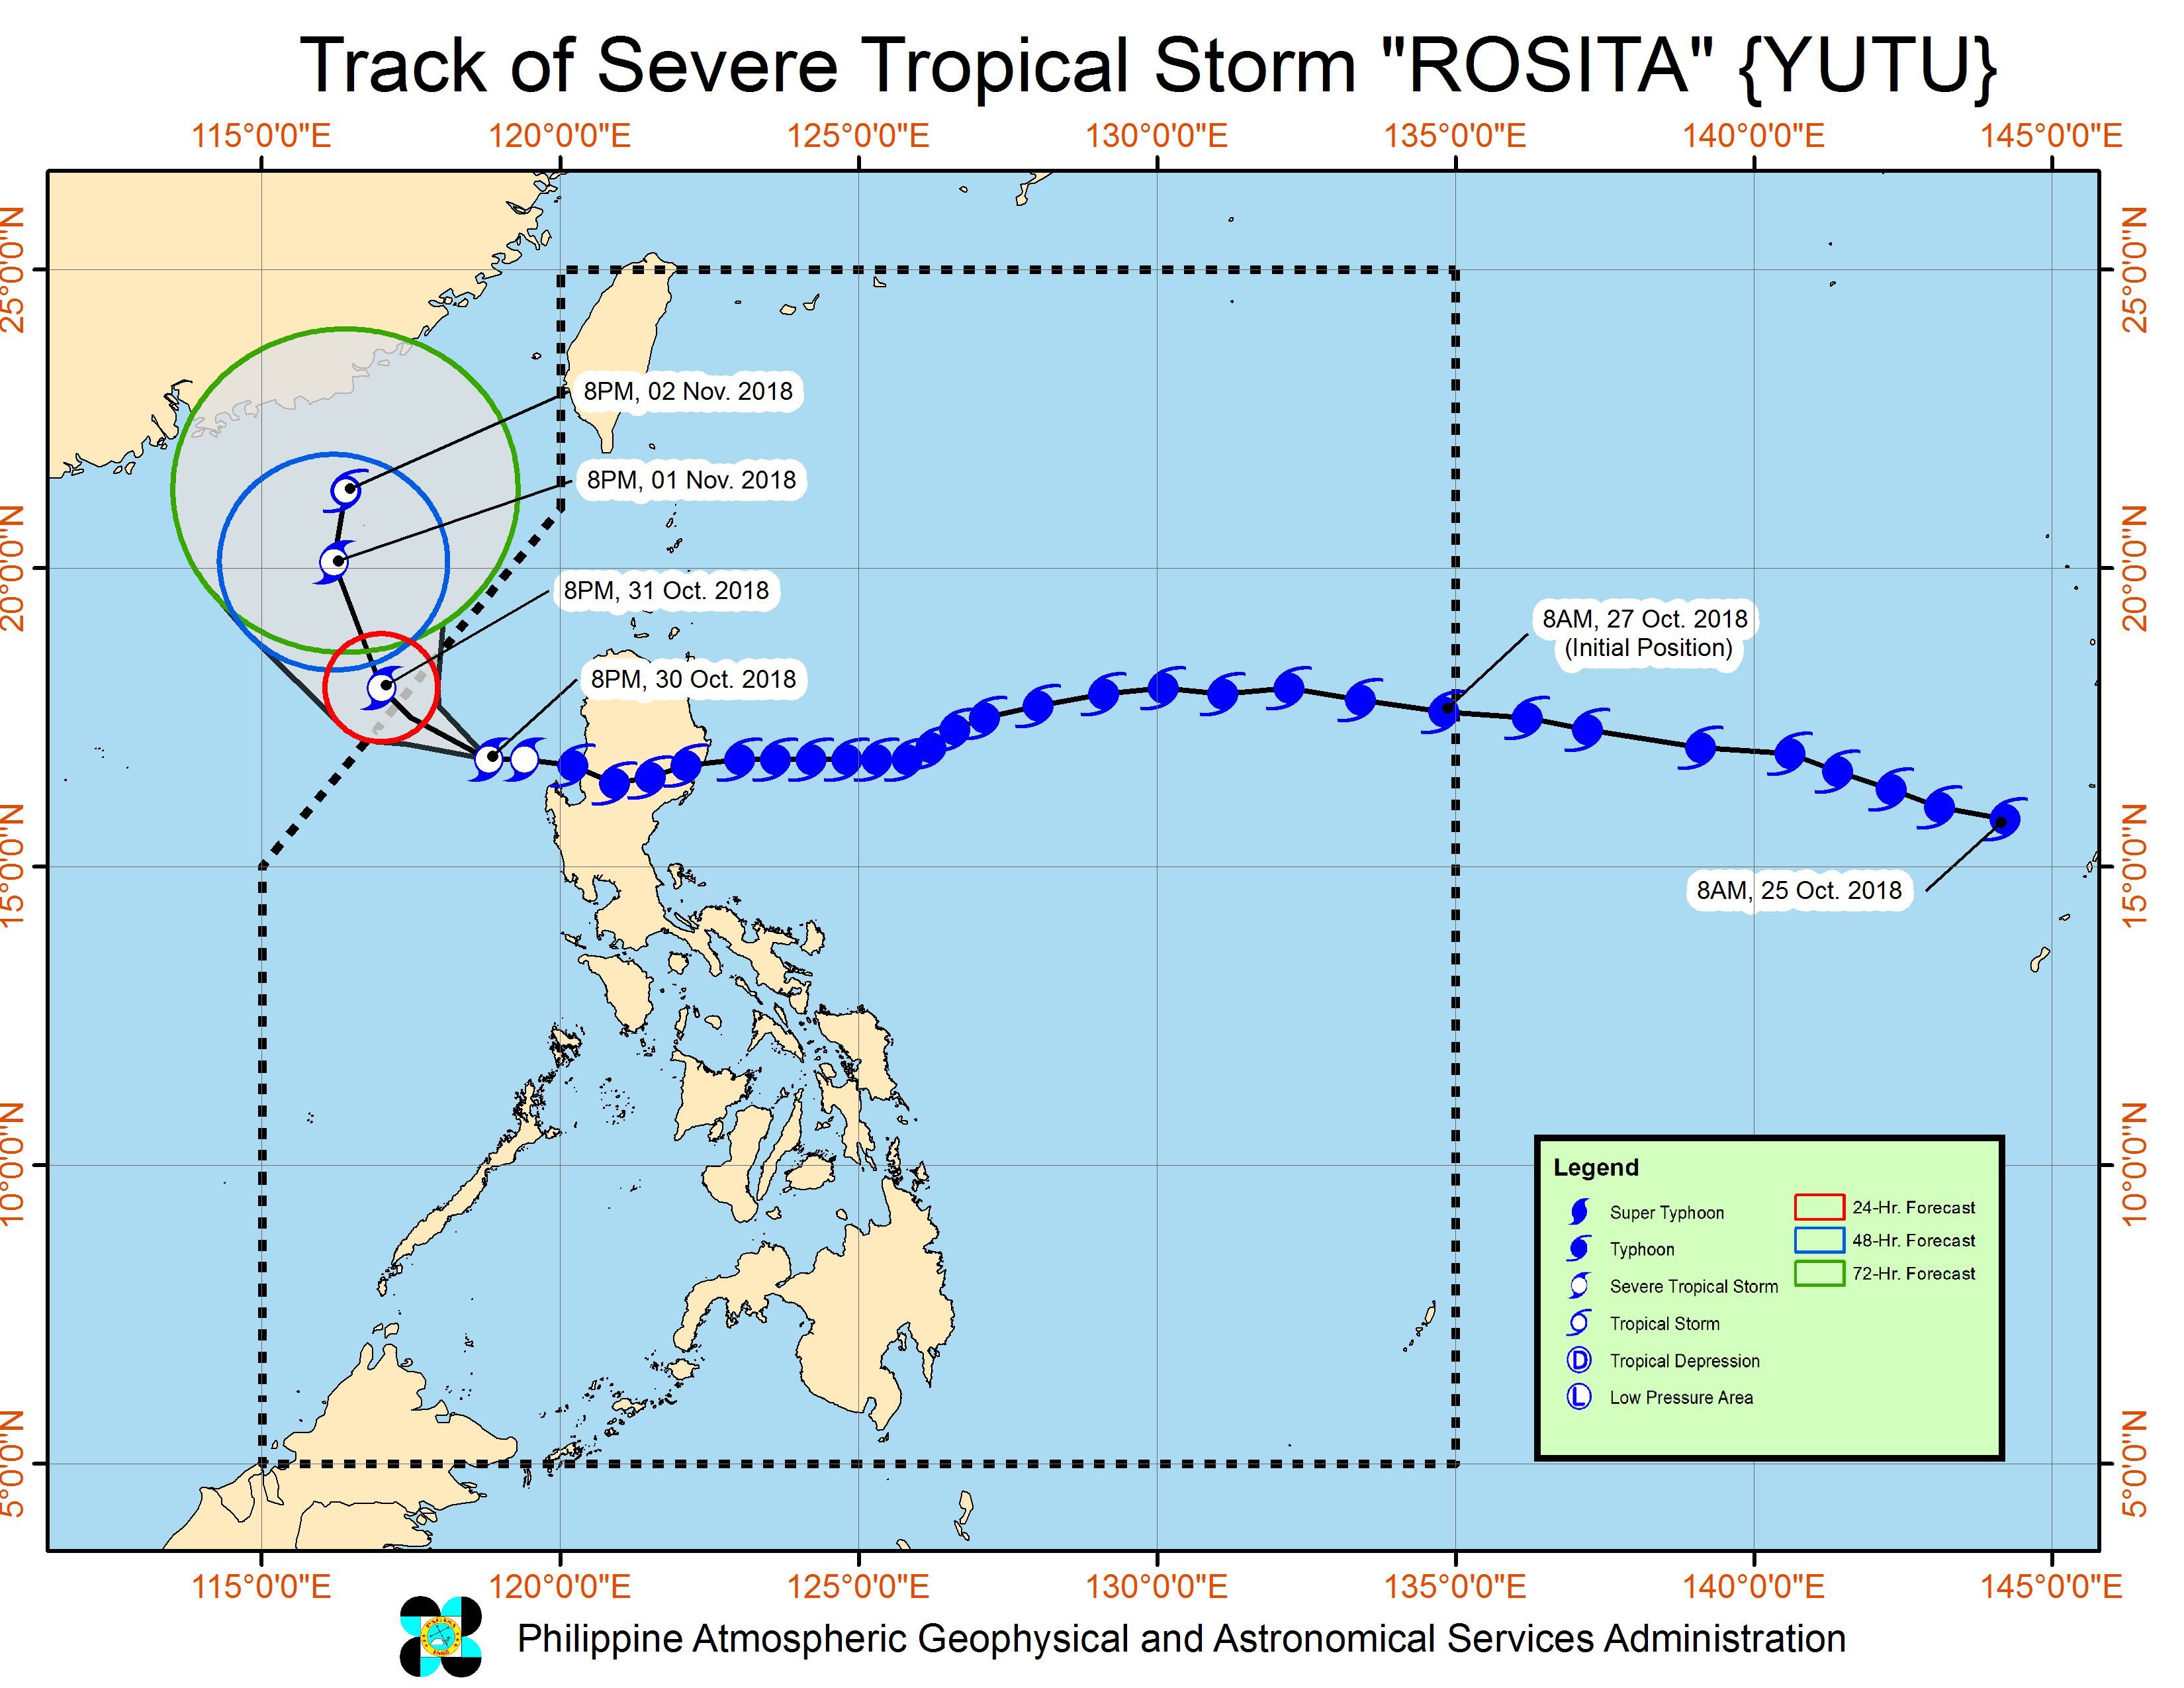 Forecast track of Severe Tropical Storm Rosita (Yutu) as of October 30, 2018, 11 pm. Image from PAGASA 